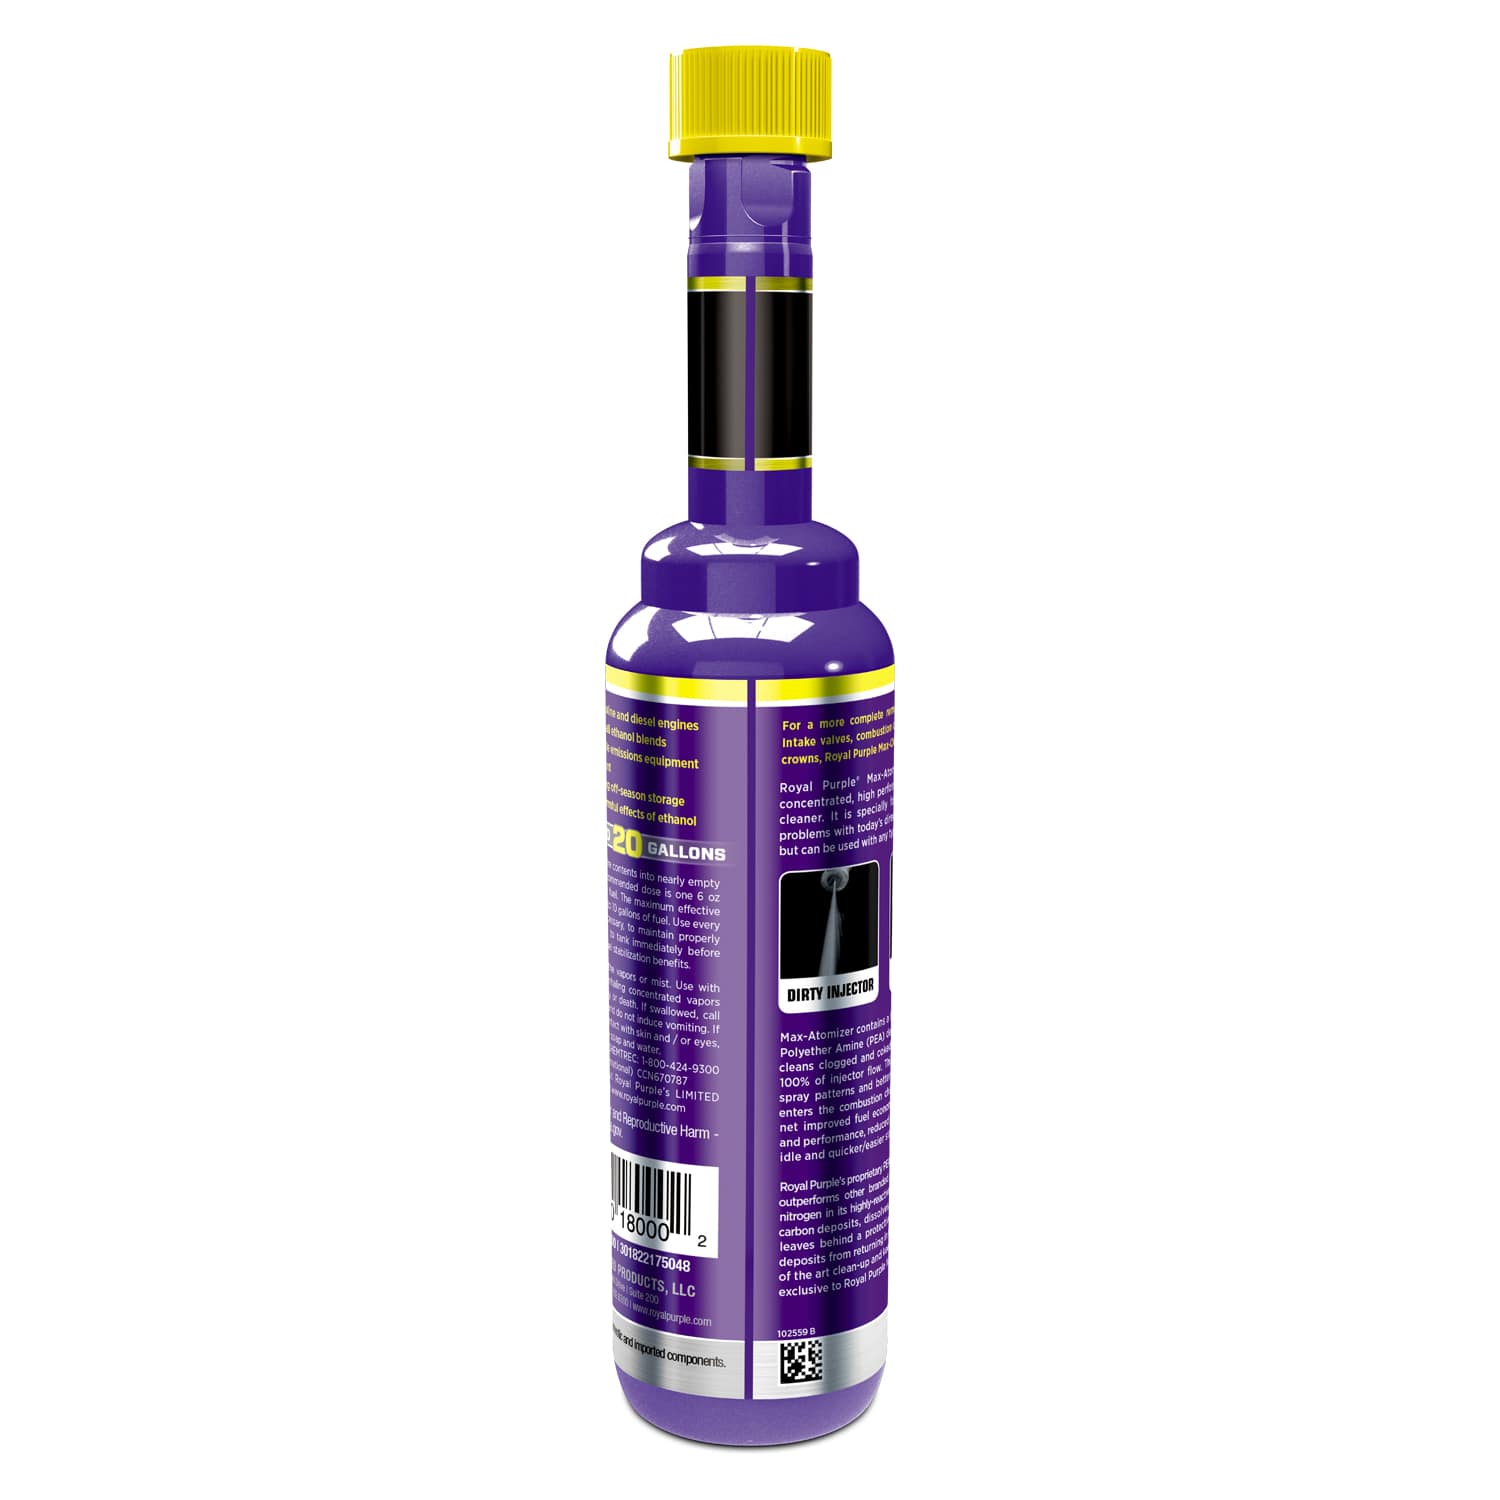 ROYAL PURPLE MAX-ATOMIZER Fuel Injector Cleaner